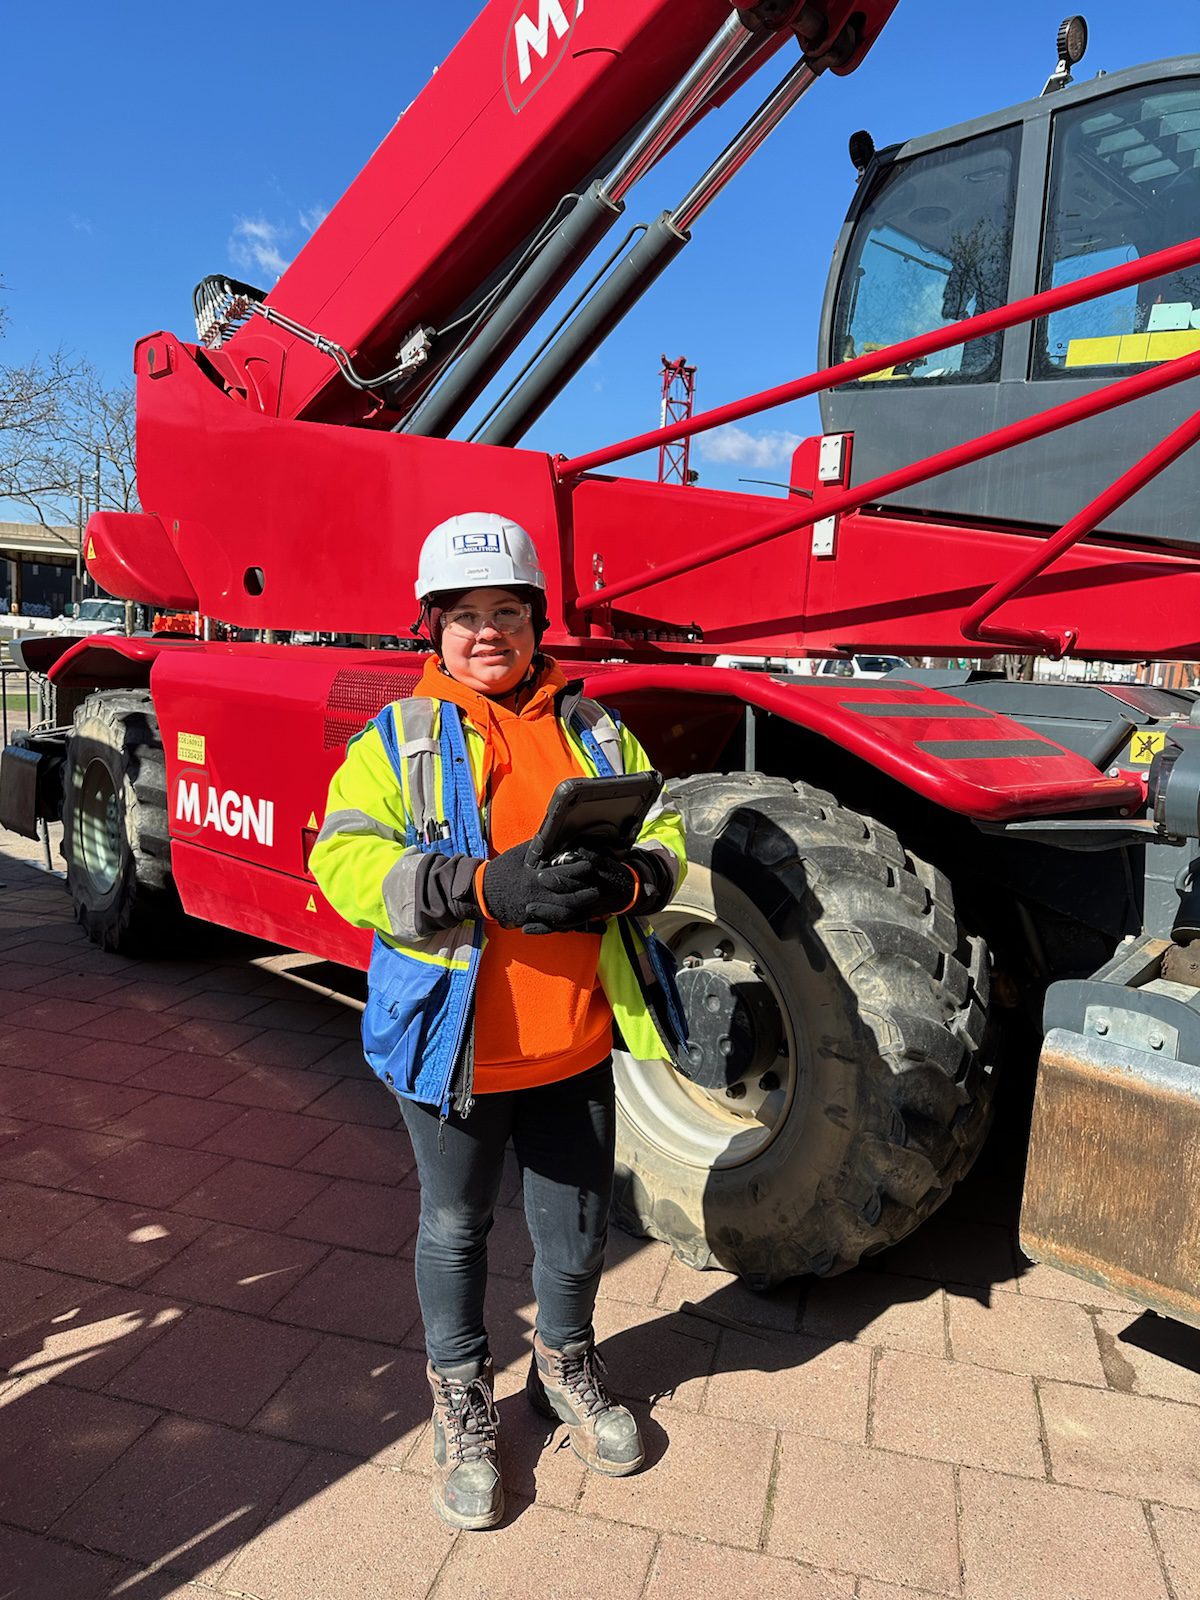 Female construction worker outside standing in front of red equipment